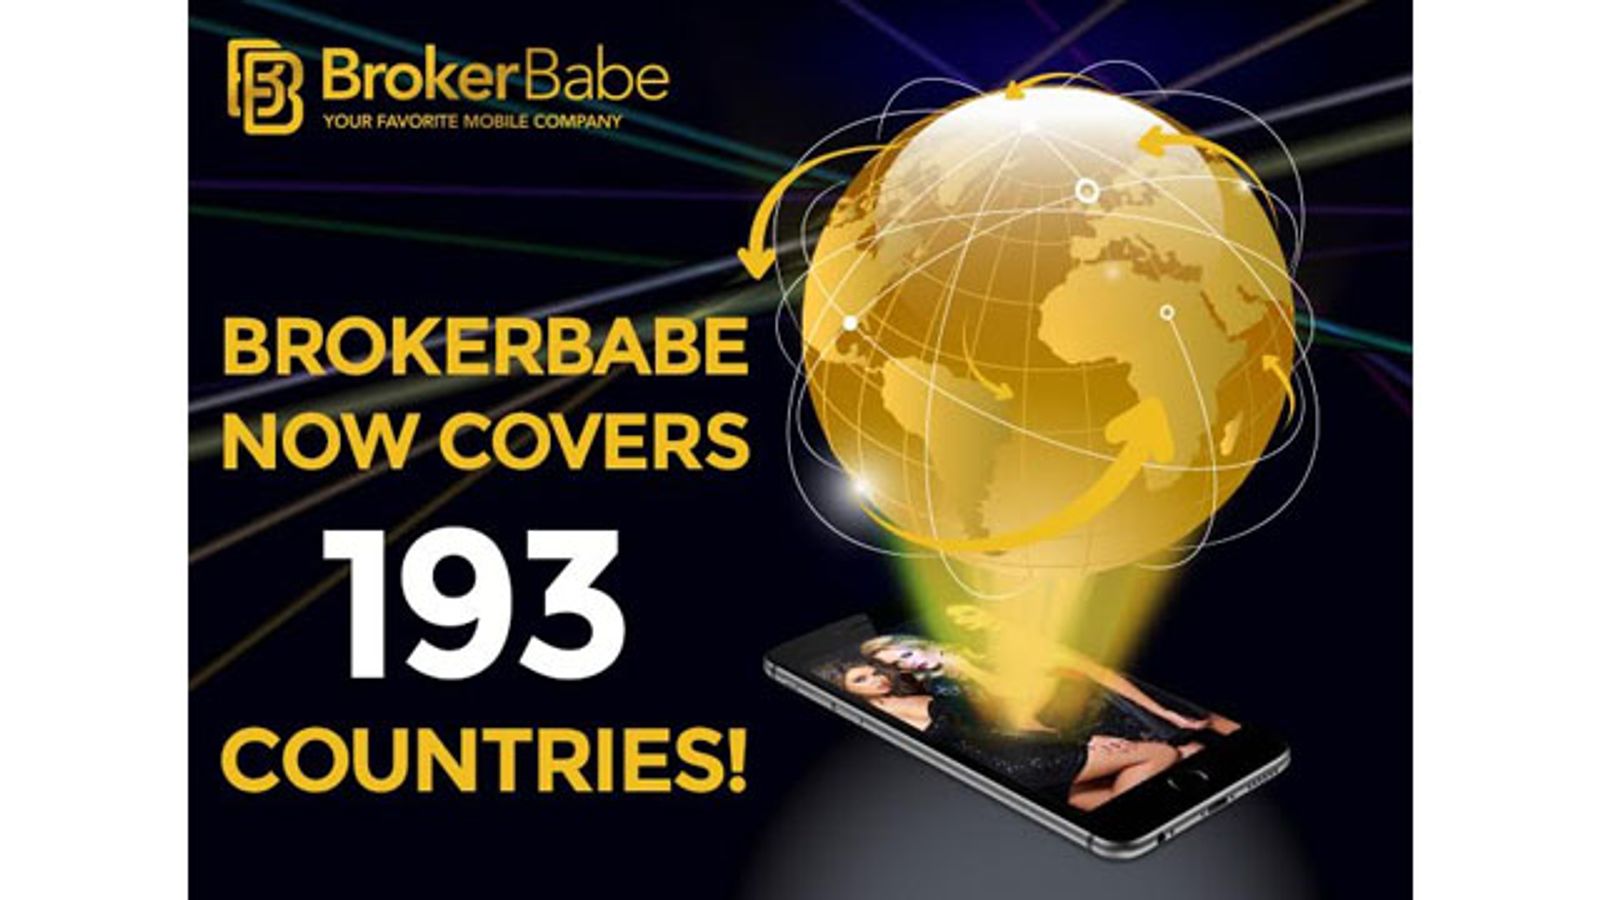 Brokerbabe Expands To Serve 193 Countries